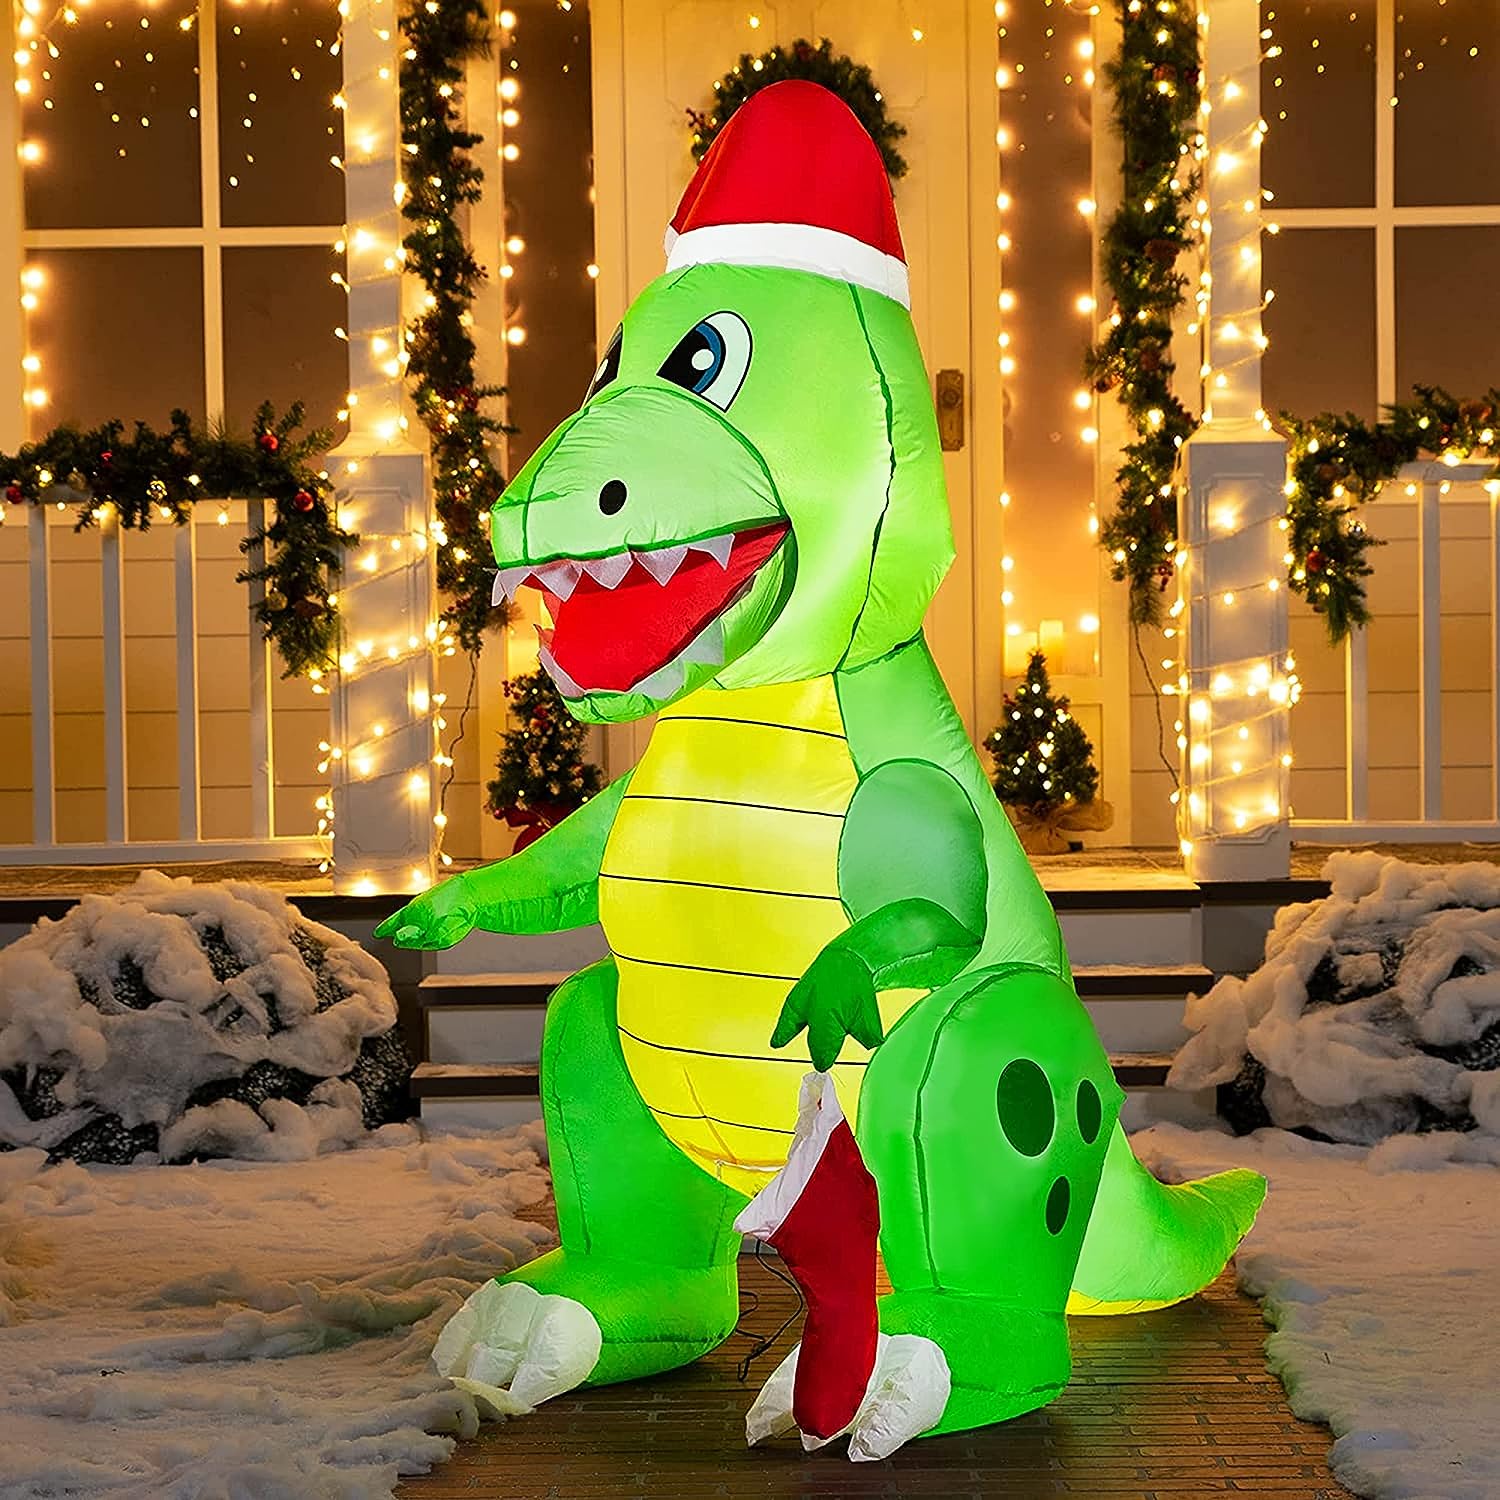 6 FT Christmas Inflatable Dinosaur, Dinosaur Holding a Christmas Stocking with Build-in LEDs, Blow Up Inflatables for Christmas Party, Outdoor, Yard, Garden, Lawn Decorations